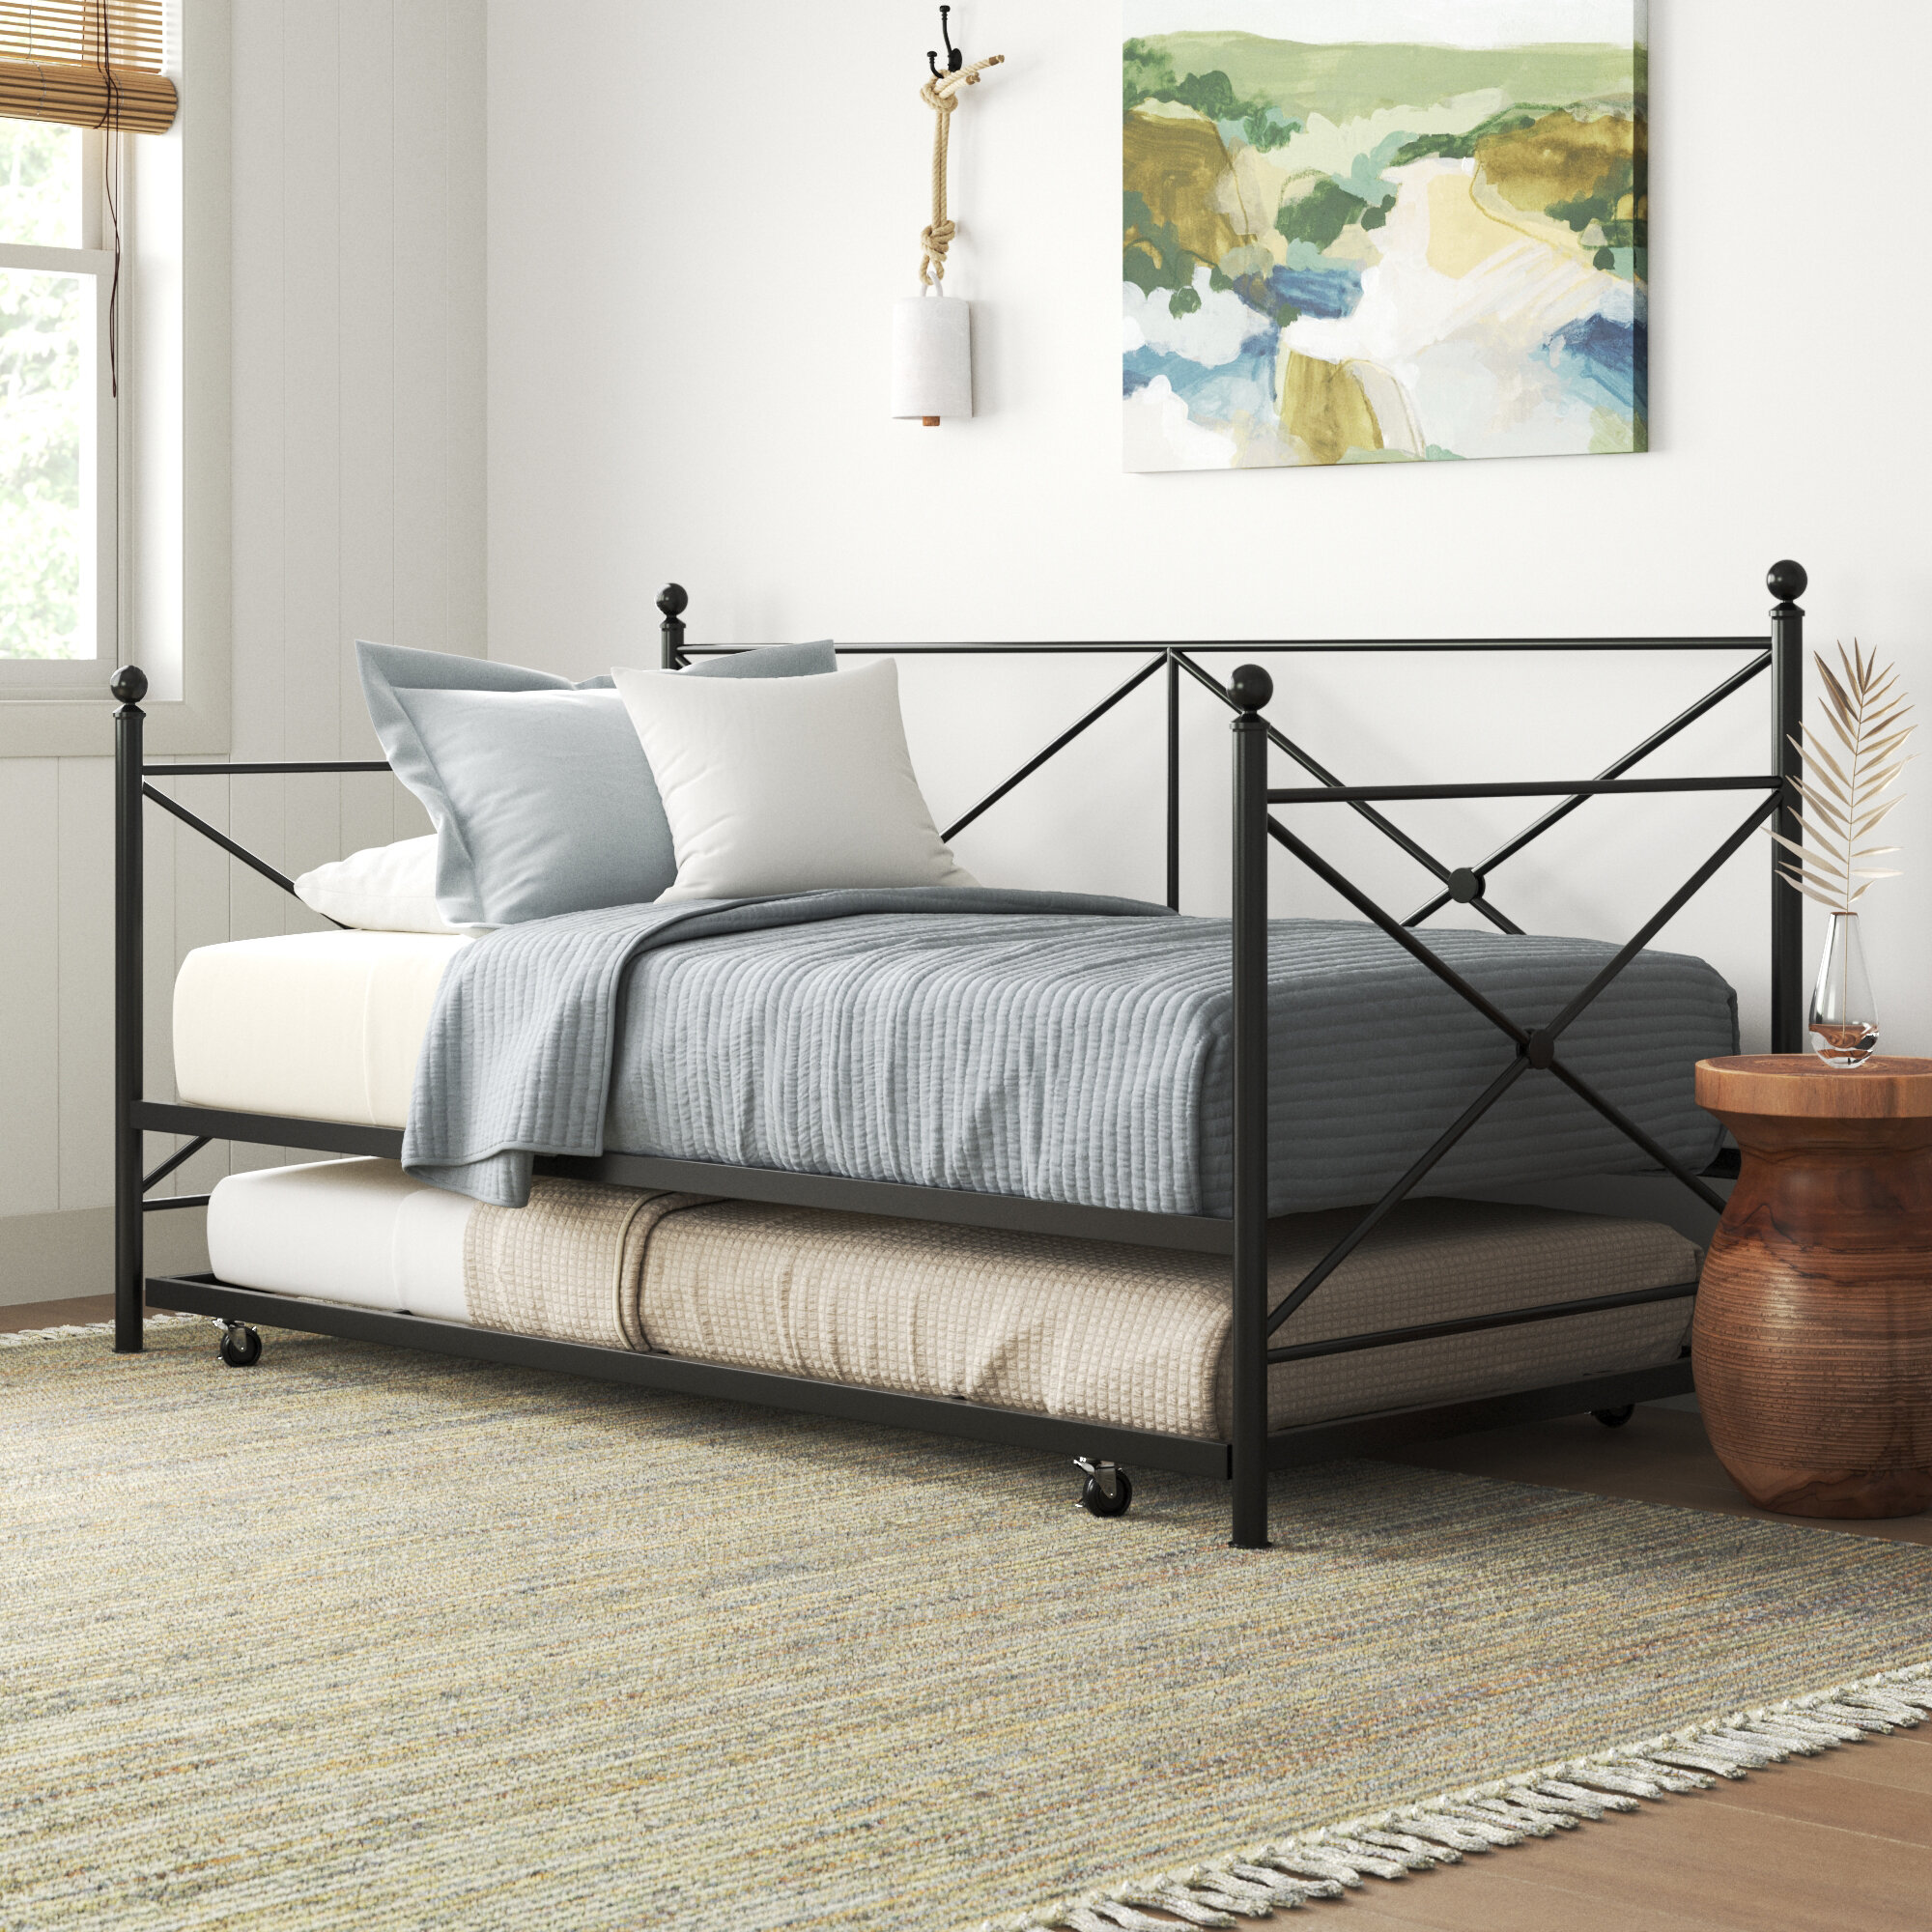 Sand & Stable Anders Metal Daybed with Trundle | Wayfair